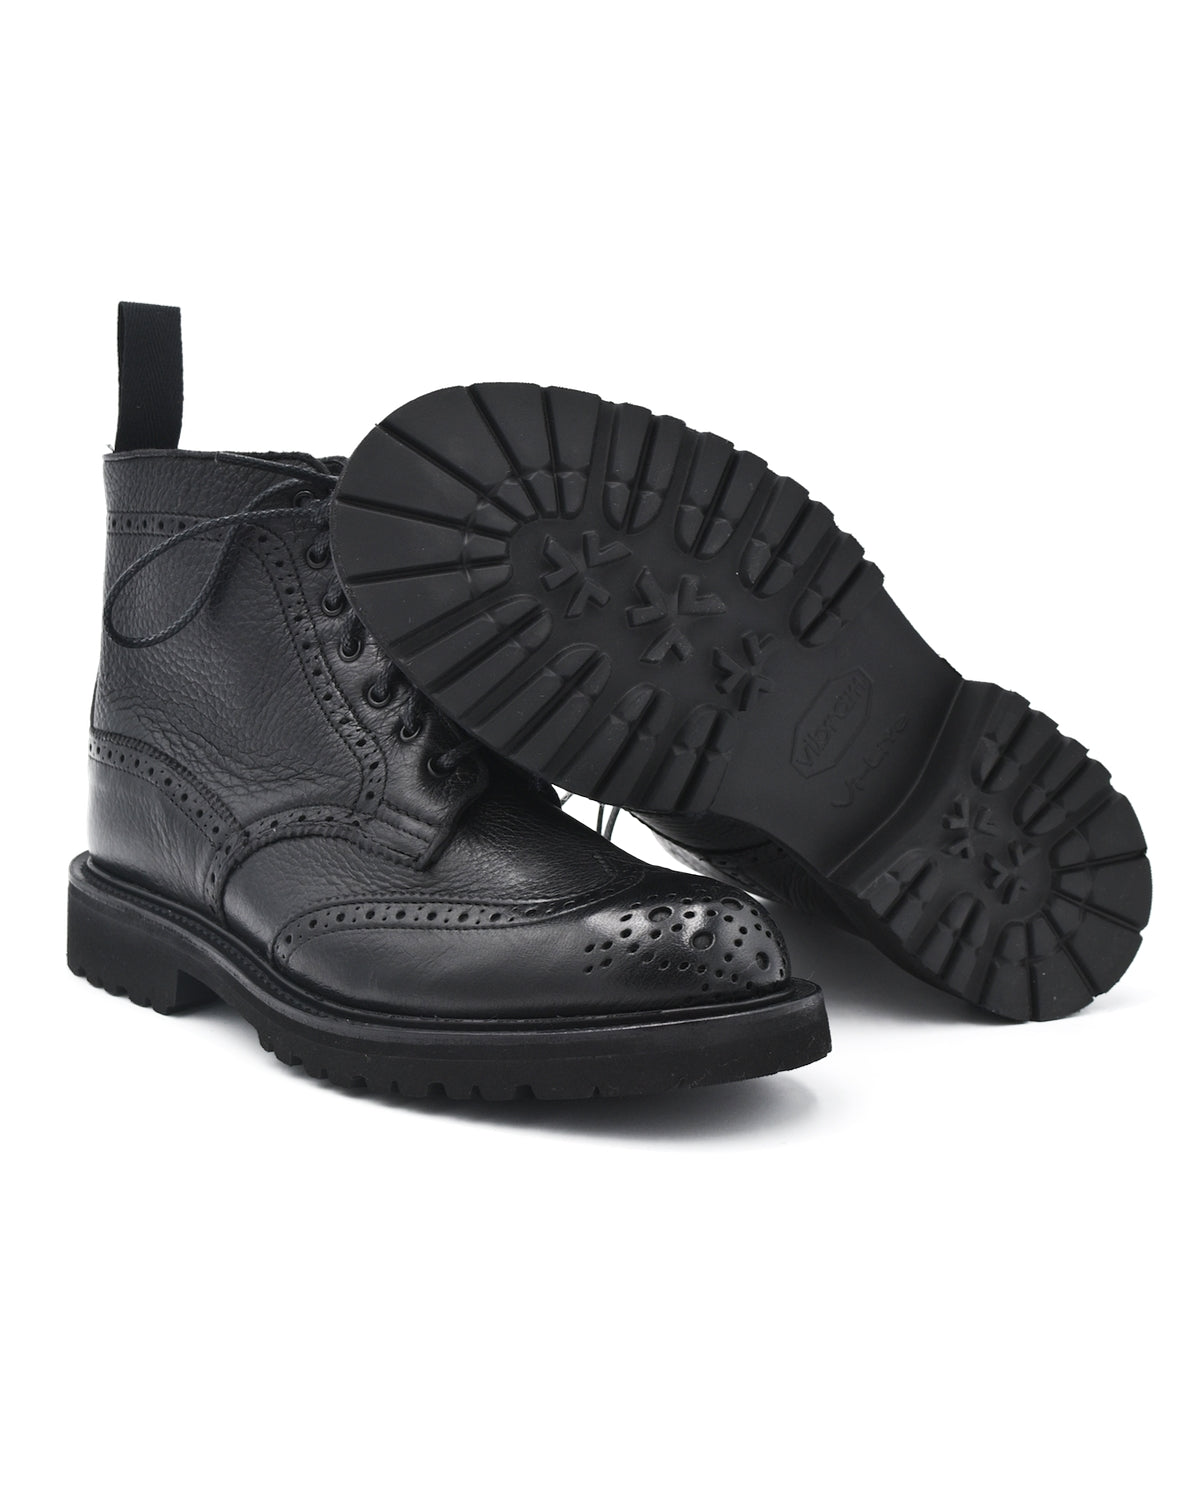 Trickers Stephy Black Brogue Boot